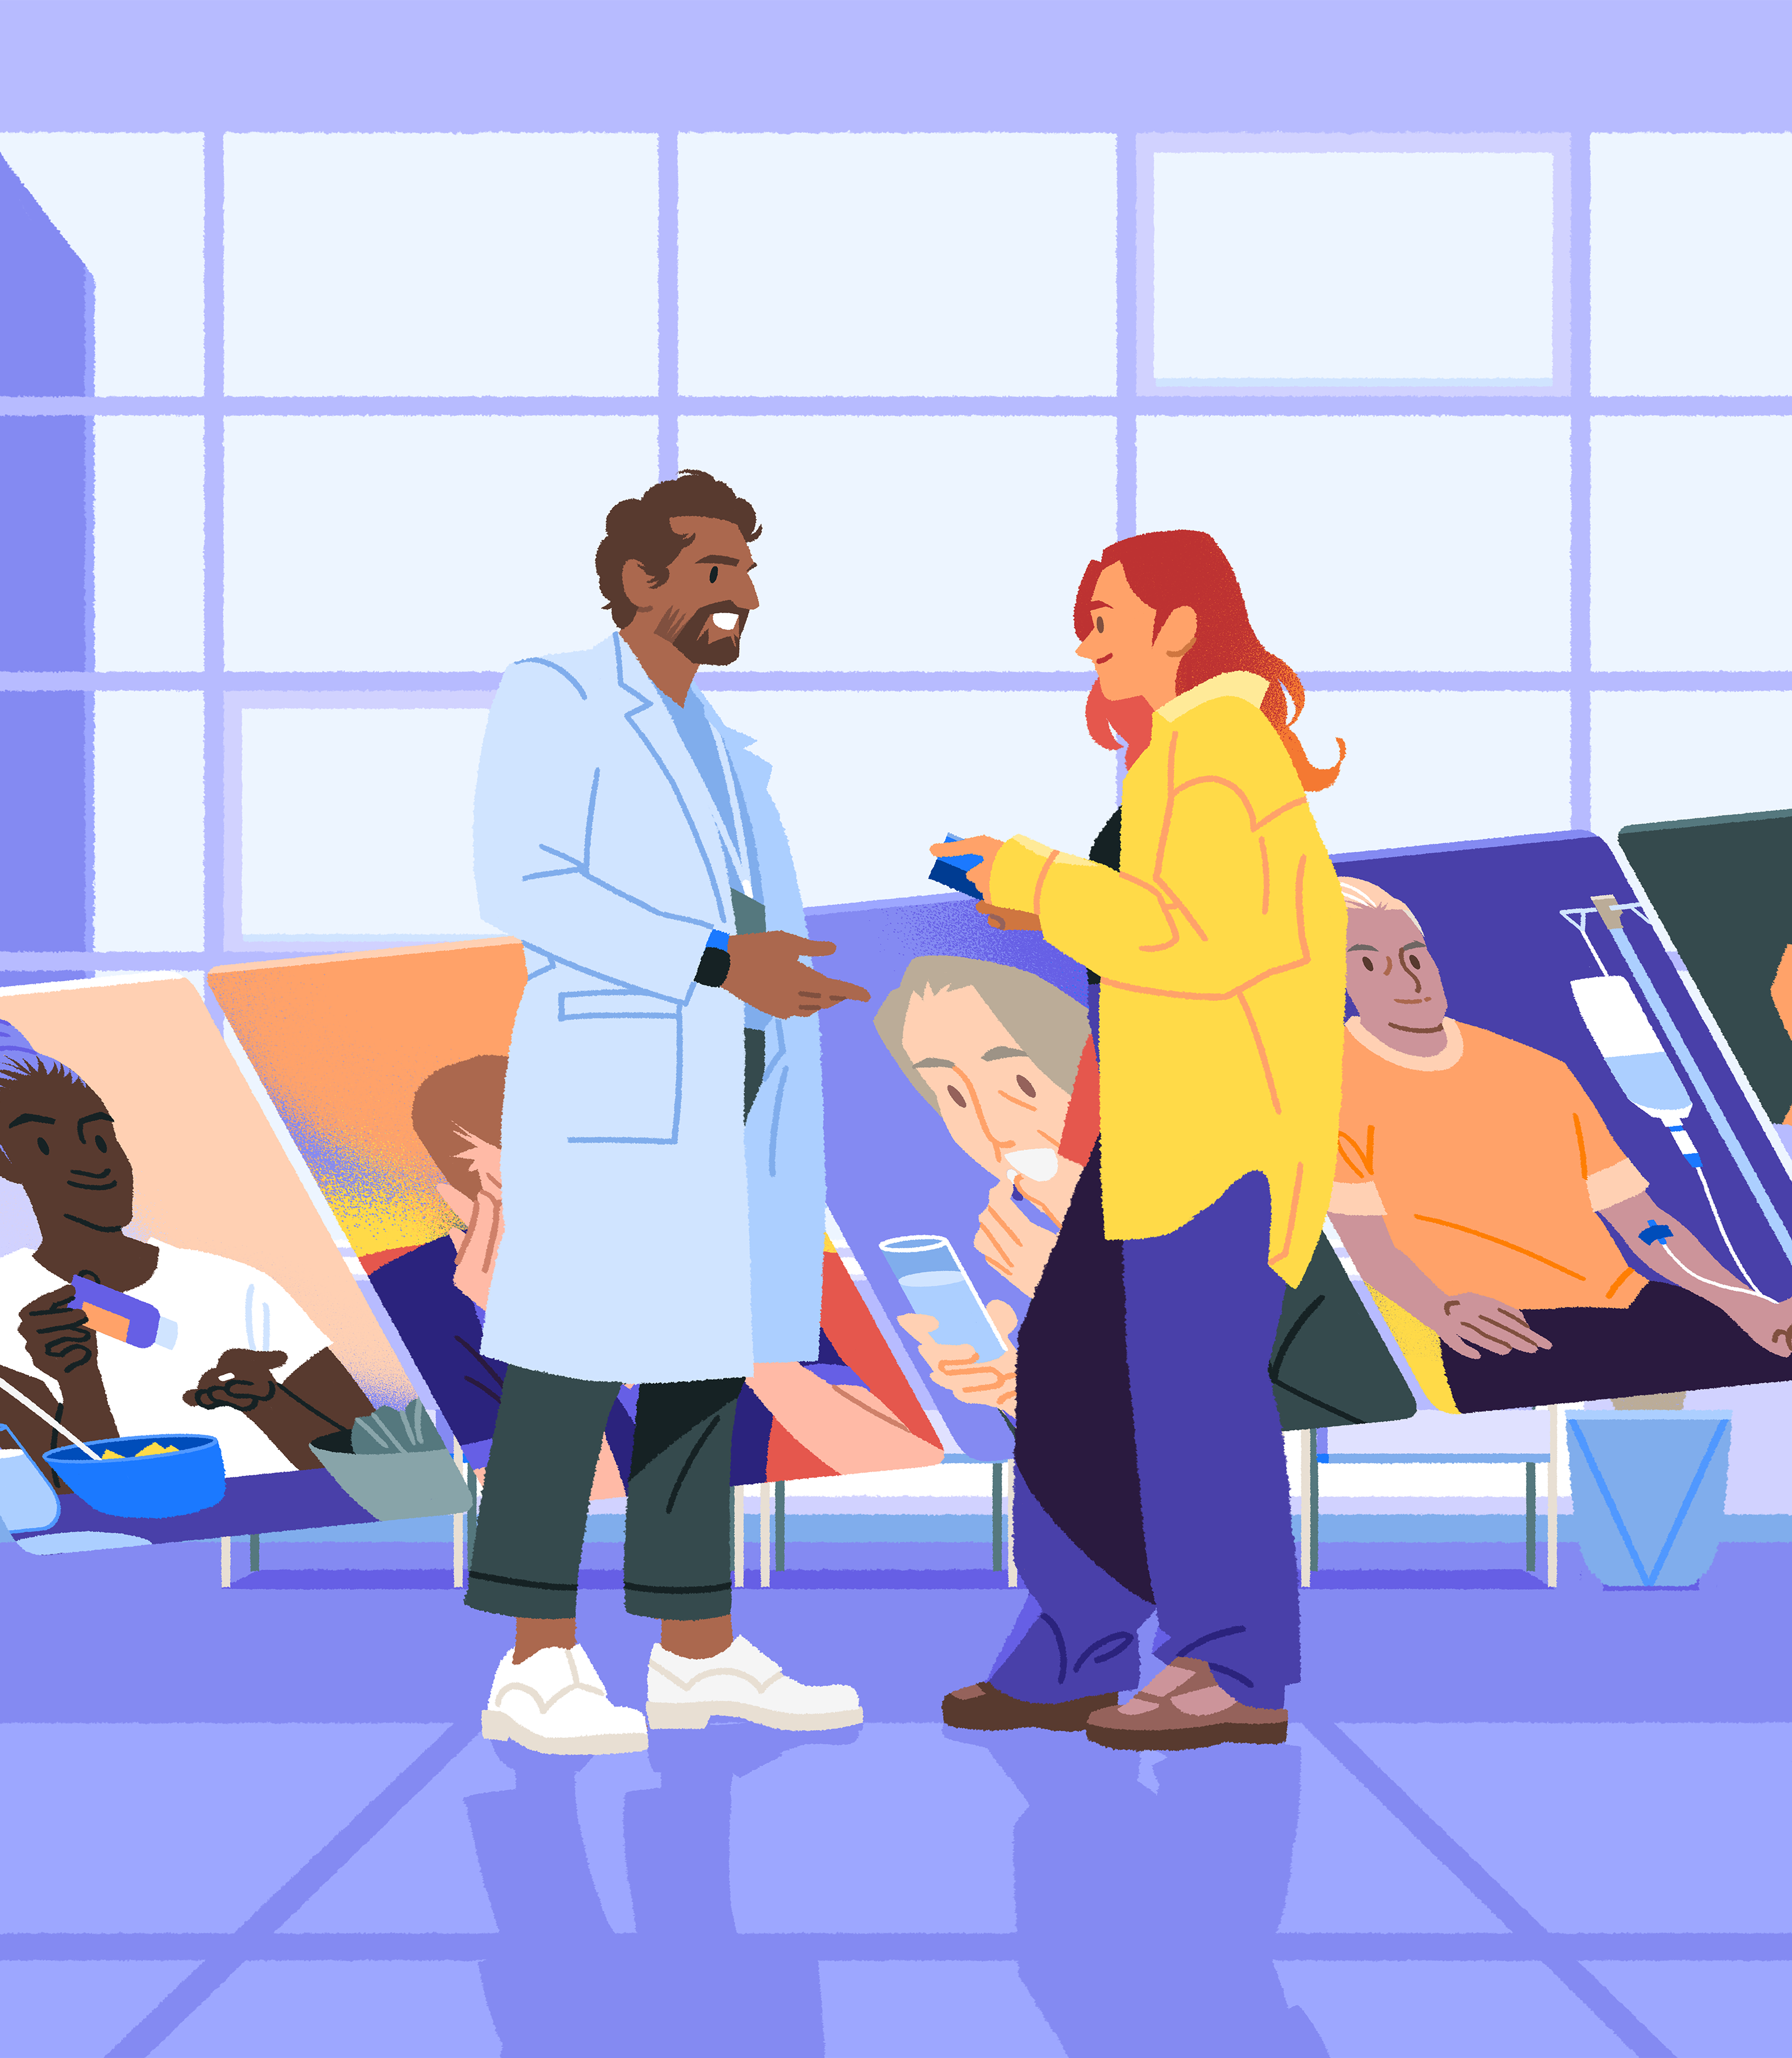 Illustration of a health-system pharmacist talking with a patient. Various patient concerns are depicted in the scene behind them.